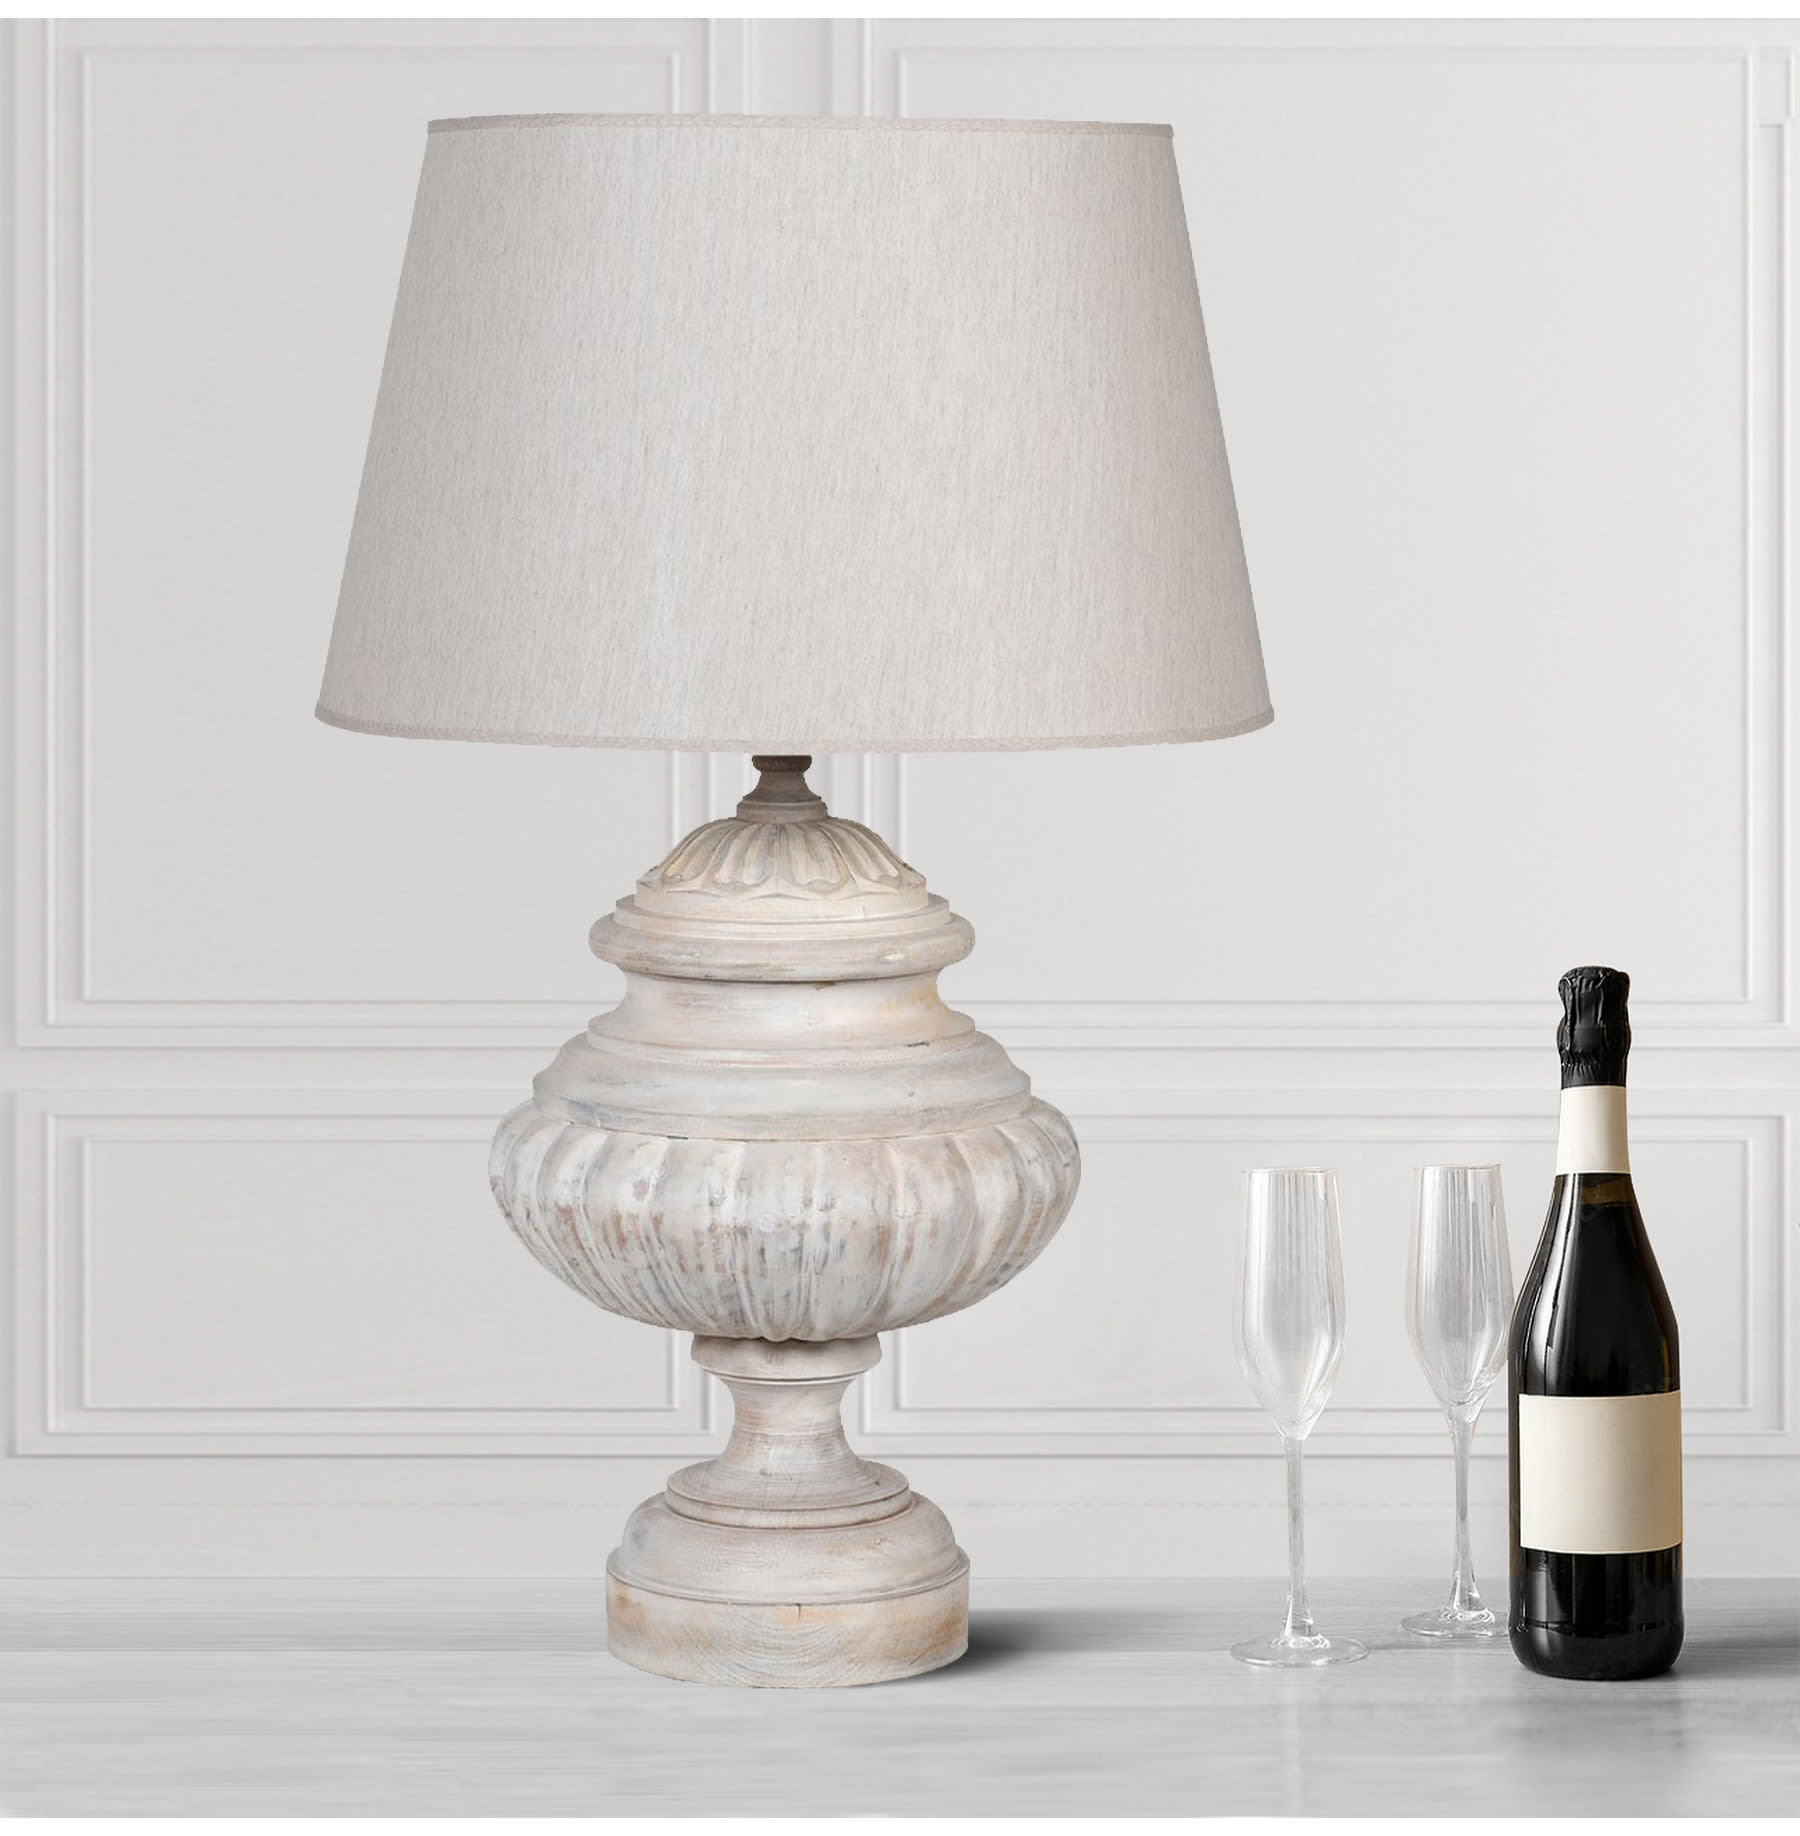 Classic Whitewashed Table Lamp